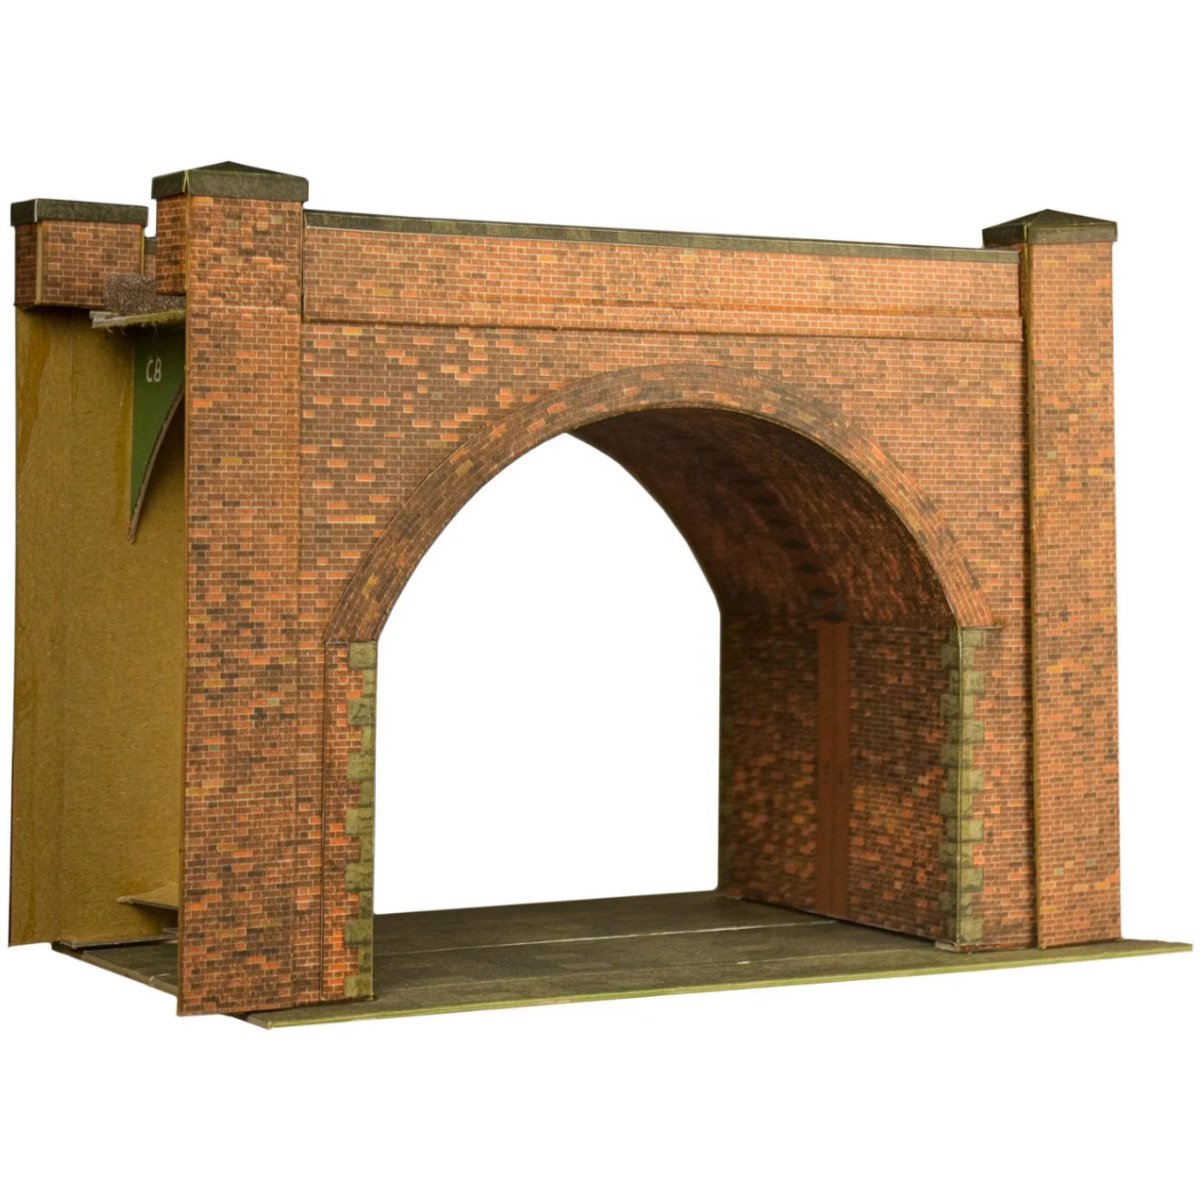 Superquick C08.0 Red Brick Embankment Arches Low Relief - Card Kit - Phillips Hobbies